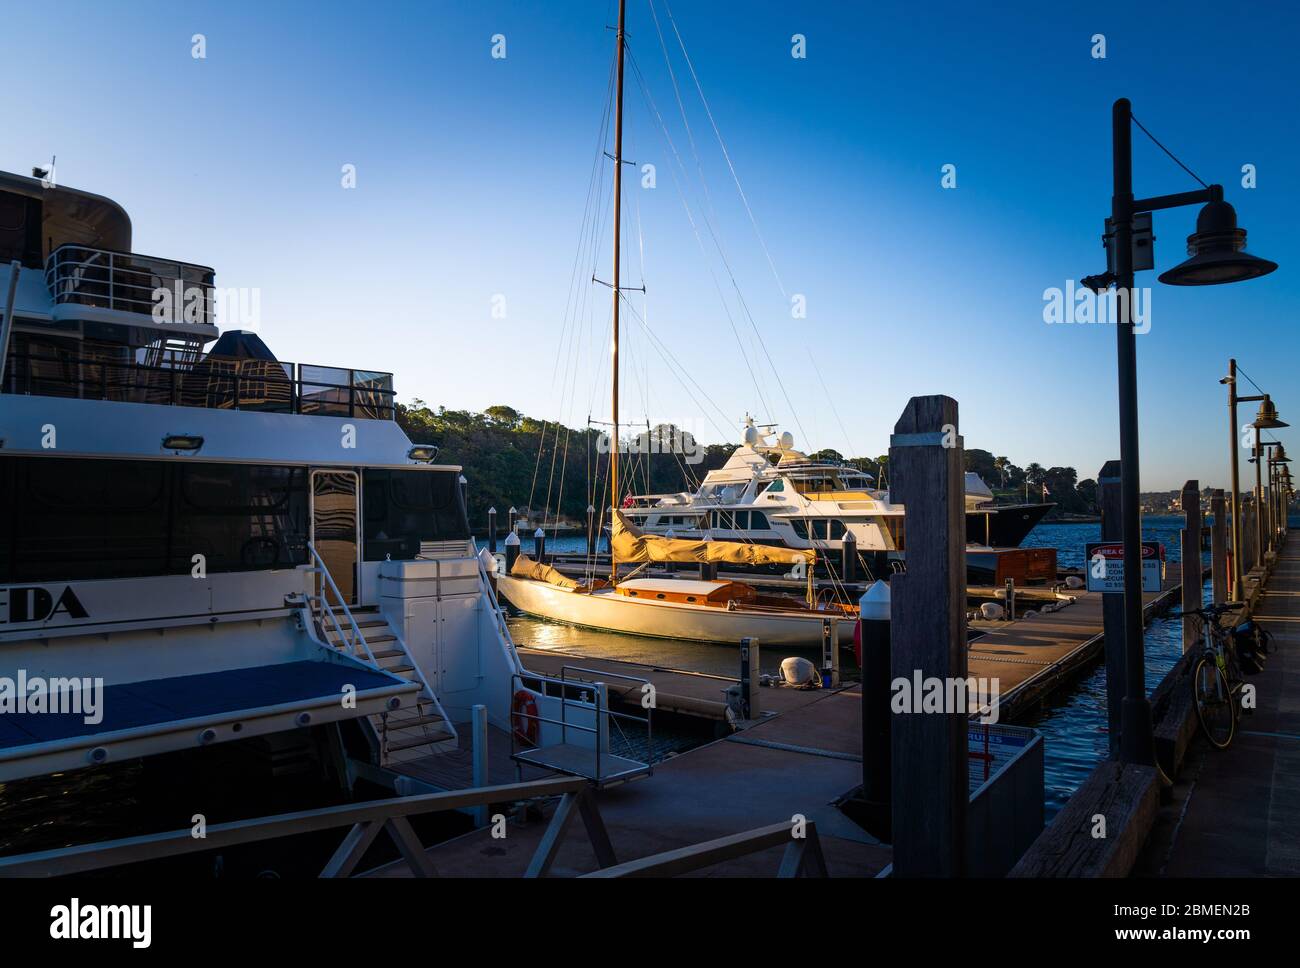 A classic old wooden yacht picked out by the sun surrounded by newer motor boats Stock Photo